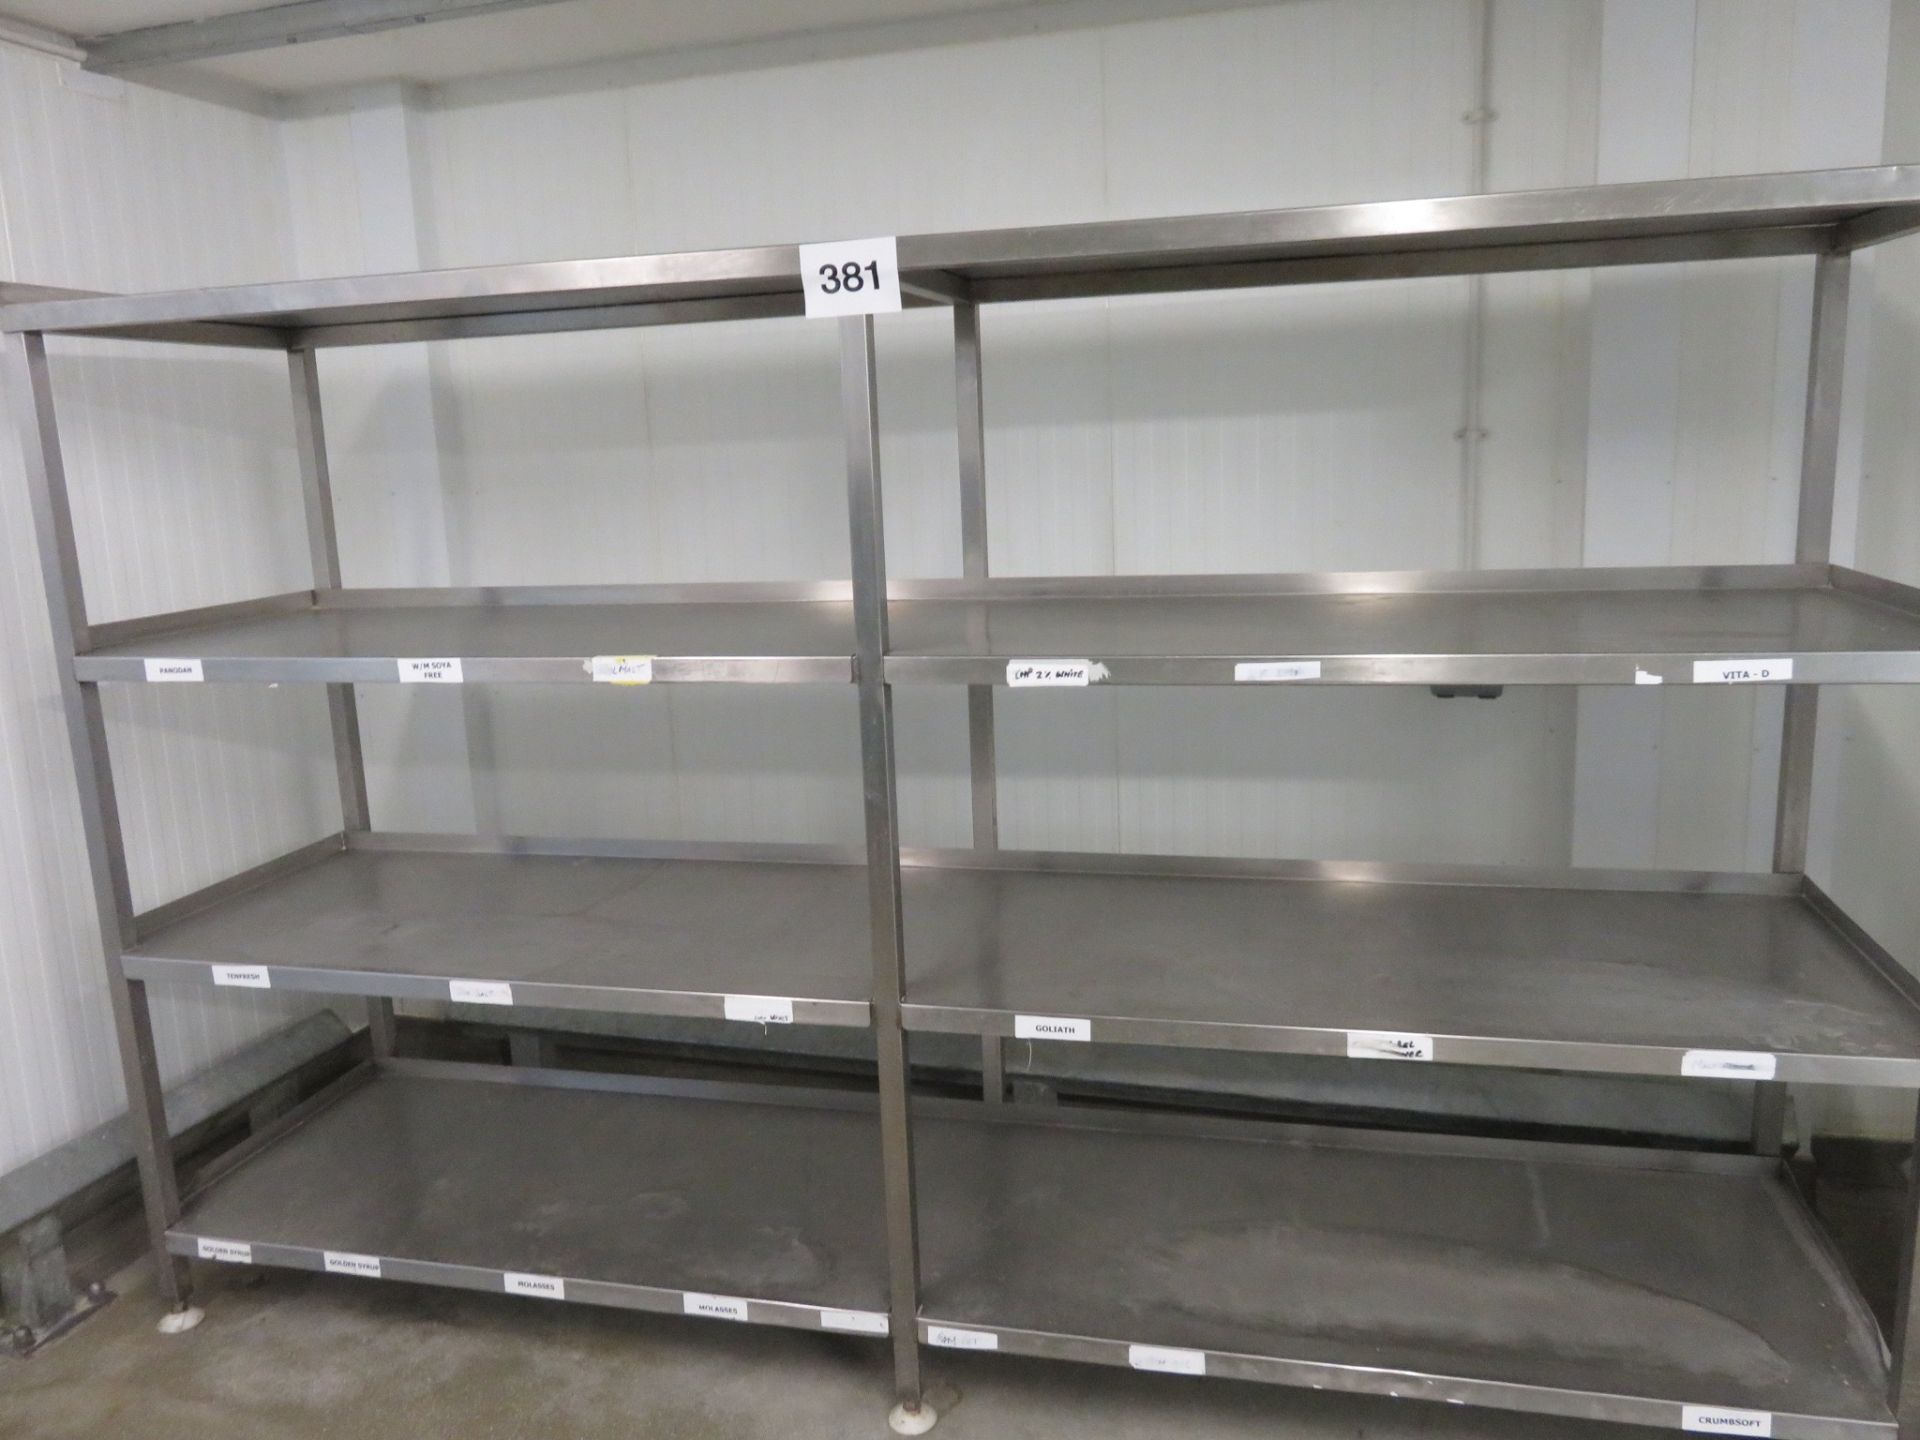 S/s Shelf. 4 shelves 2900mm x 700mm x 1900mm high. Lift out charge £35